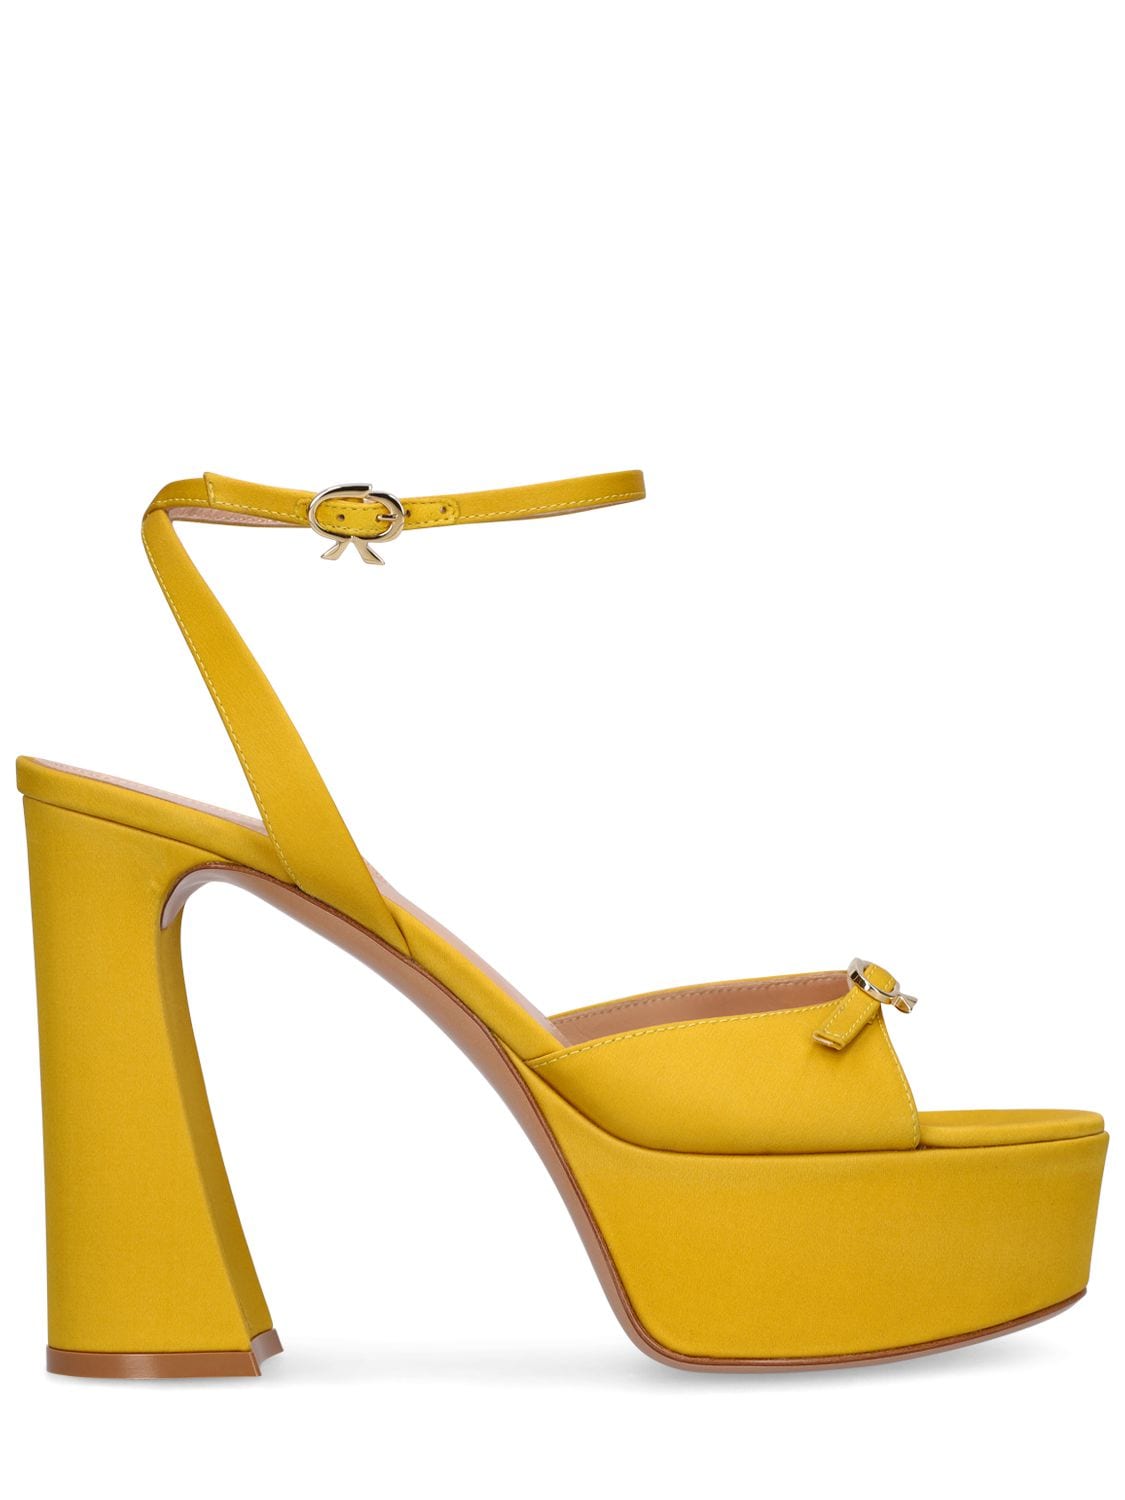 Gianvito Rossi 105mm Maddy Satin Platform Sandals In Yellow